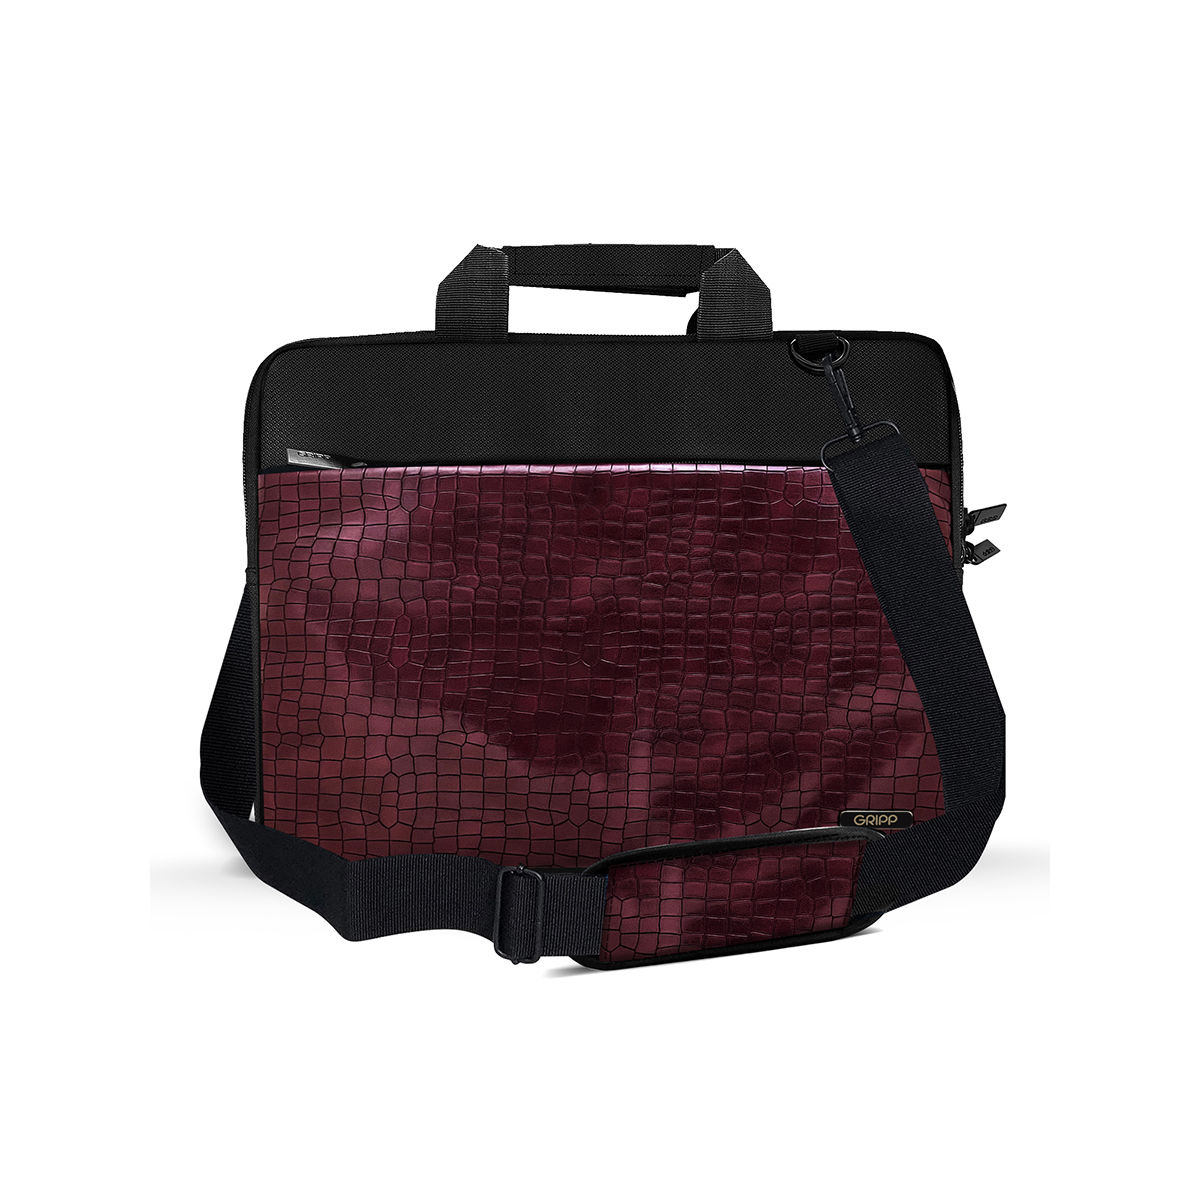 GRIPP Croc Compact Fleet Executive Business Laptop Bag 13.3 and 14 Inches - Burgundy